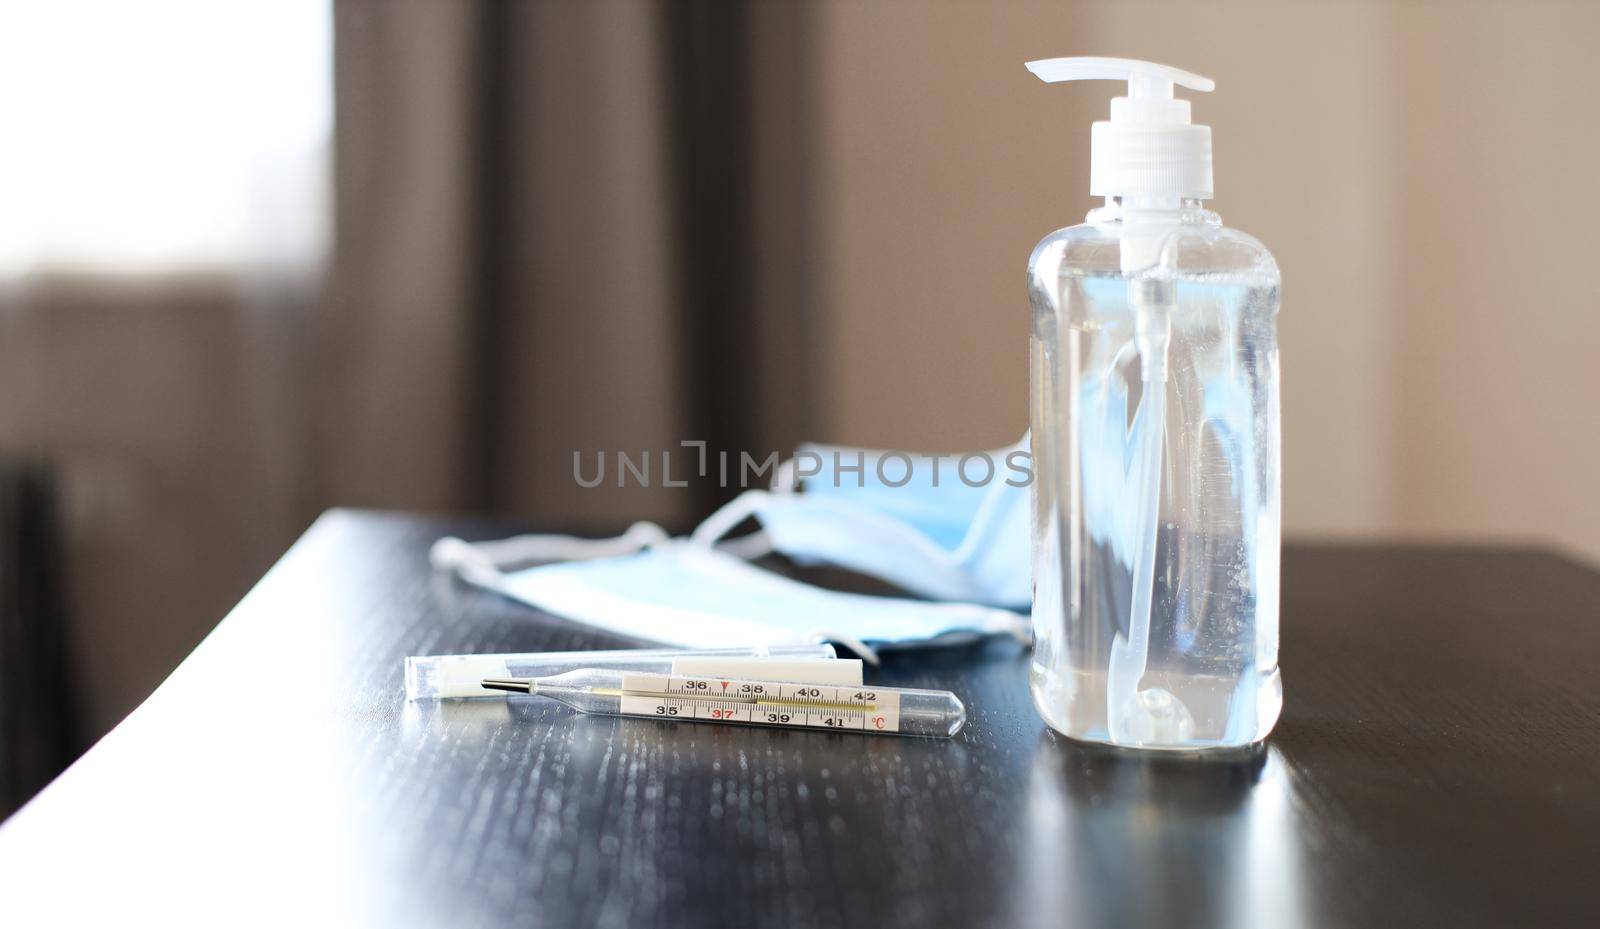 Analogue medical thermometer showing high temperature, prevention medical surgical mask and sanitizer gel for hand hygiene corona virus protection lies on table.